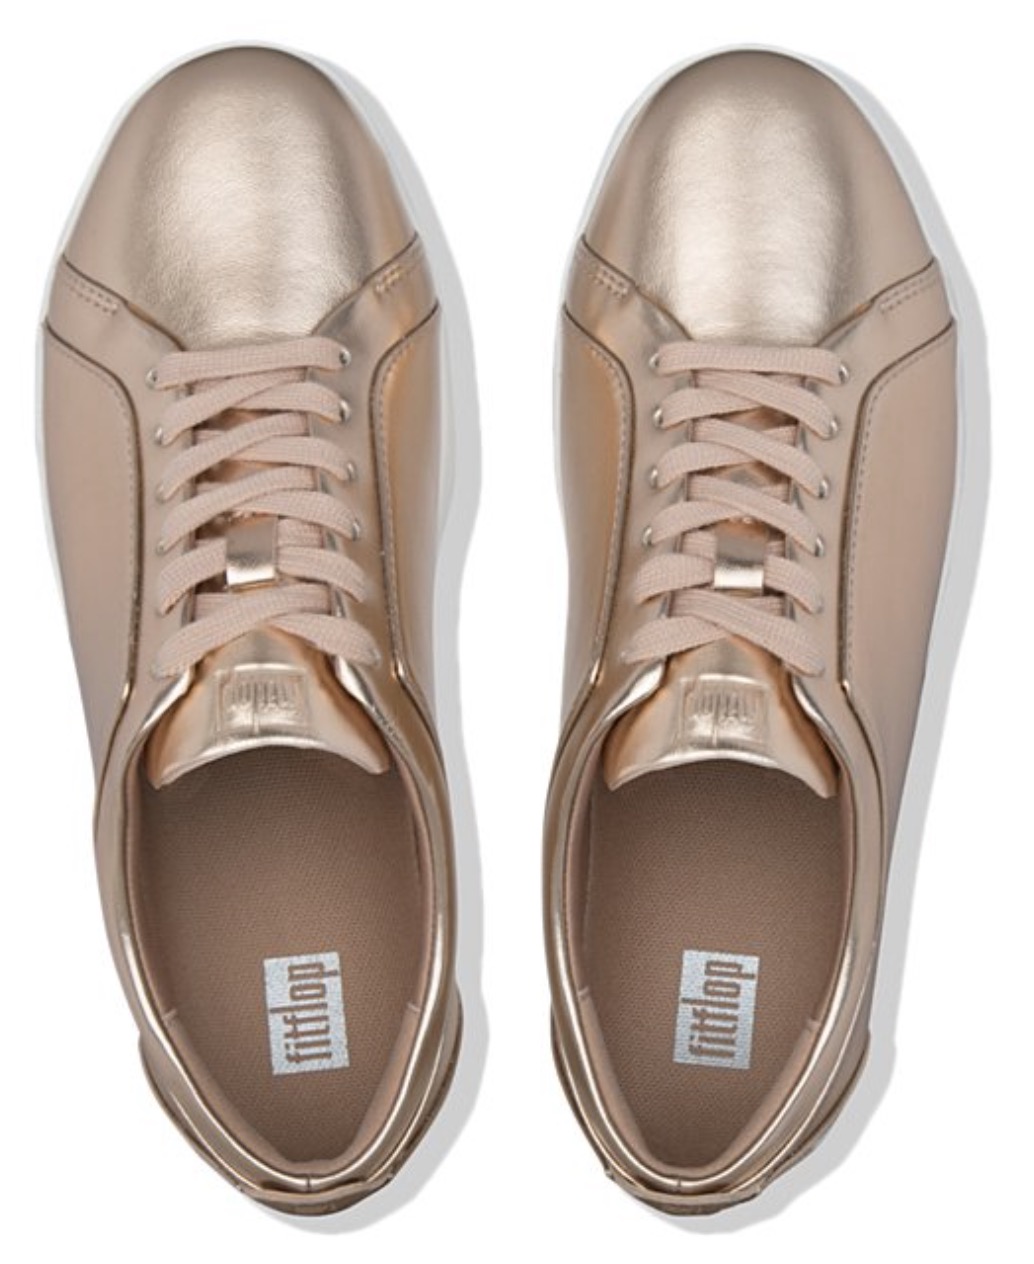 fitflop rose gold